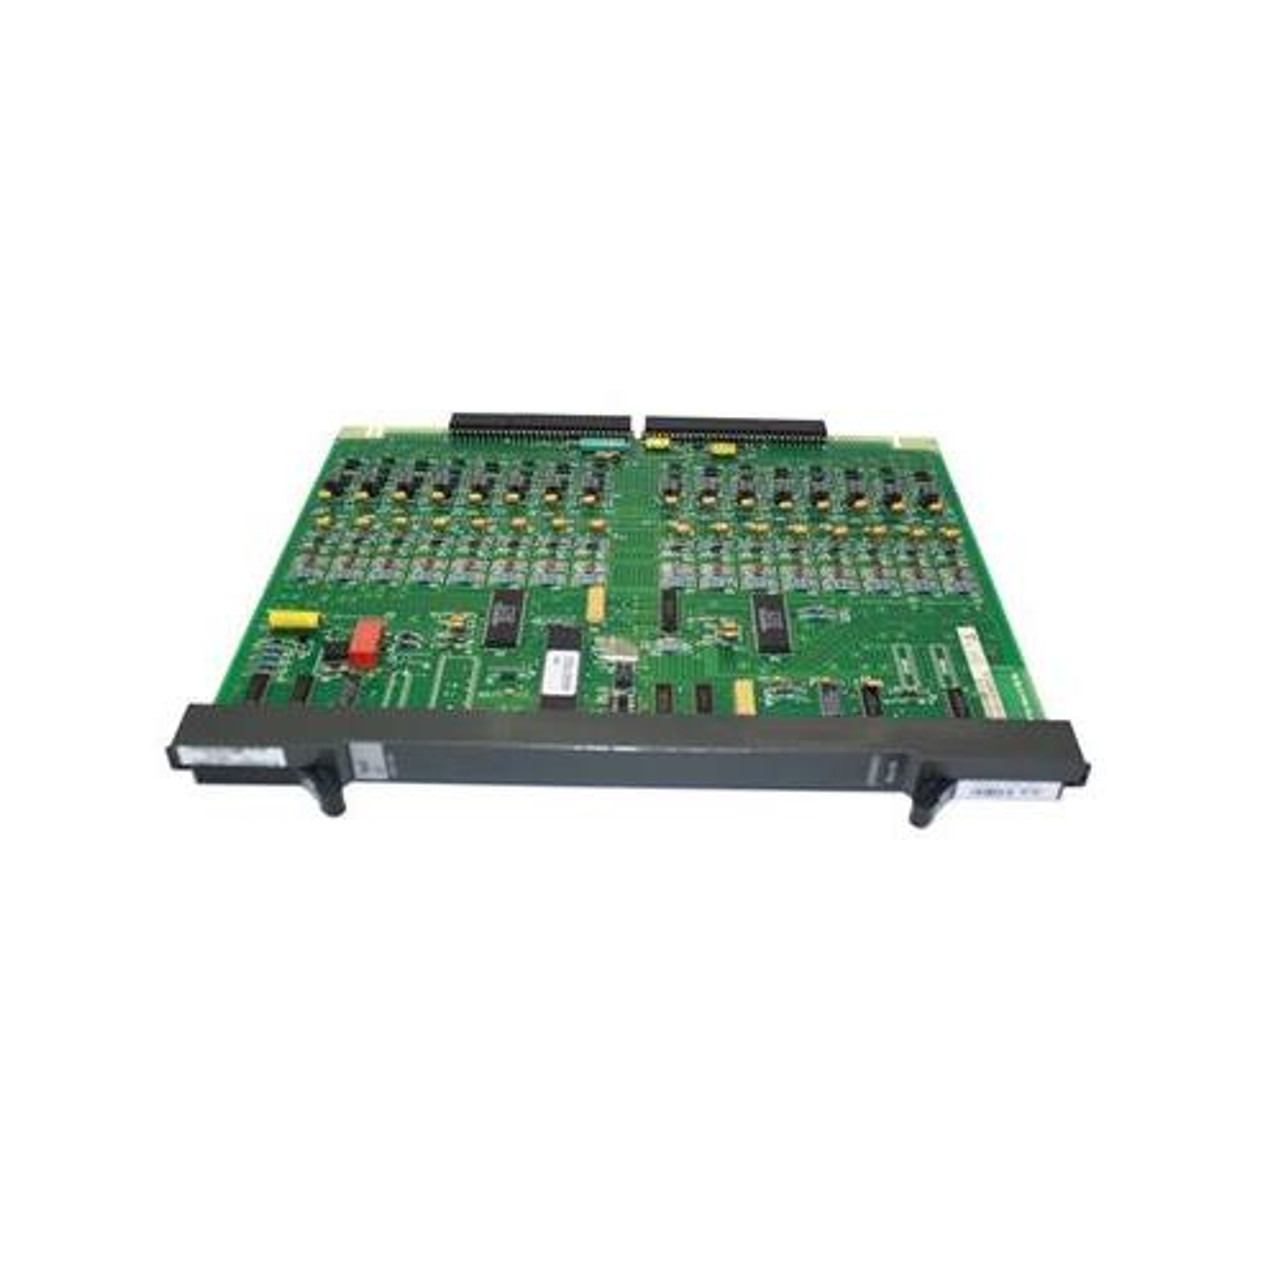 AG0011021 Nortel 16M FRE2-060E with Advanced Compression Co-processor spare For 128 Context (Refurbished)